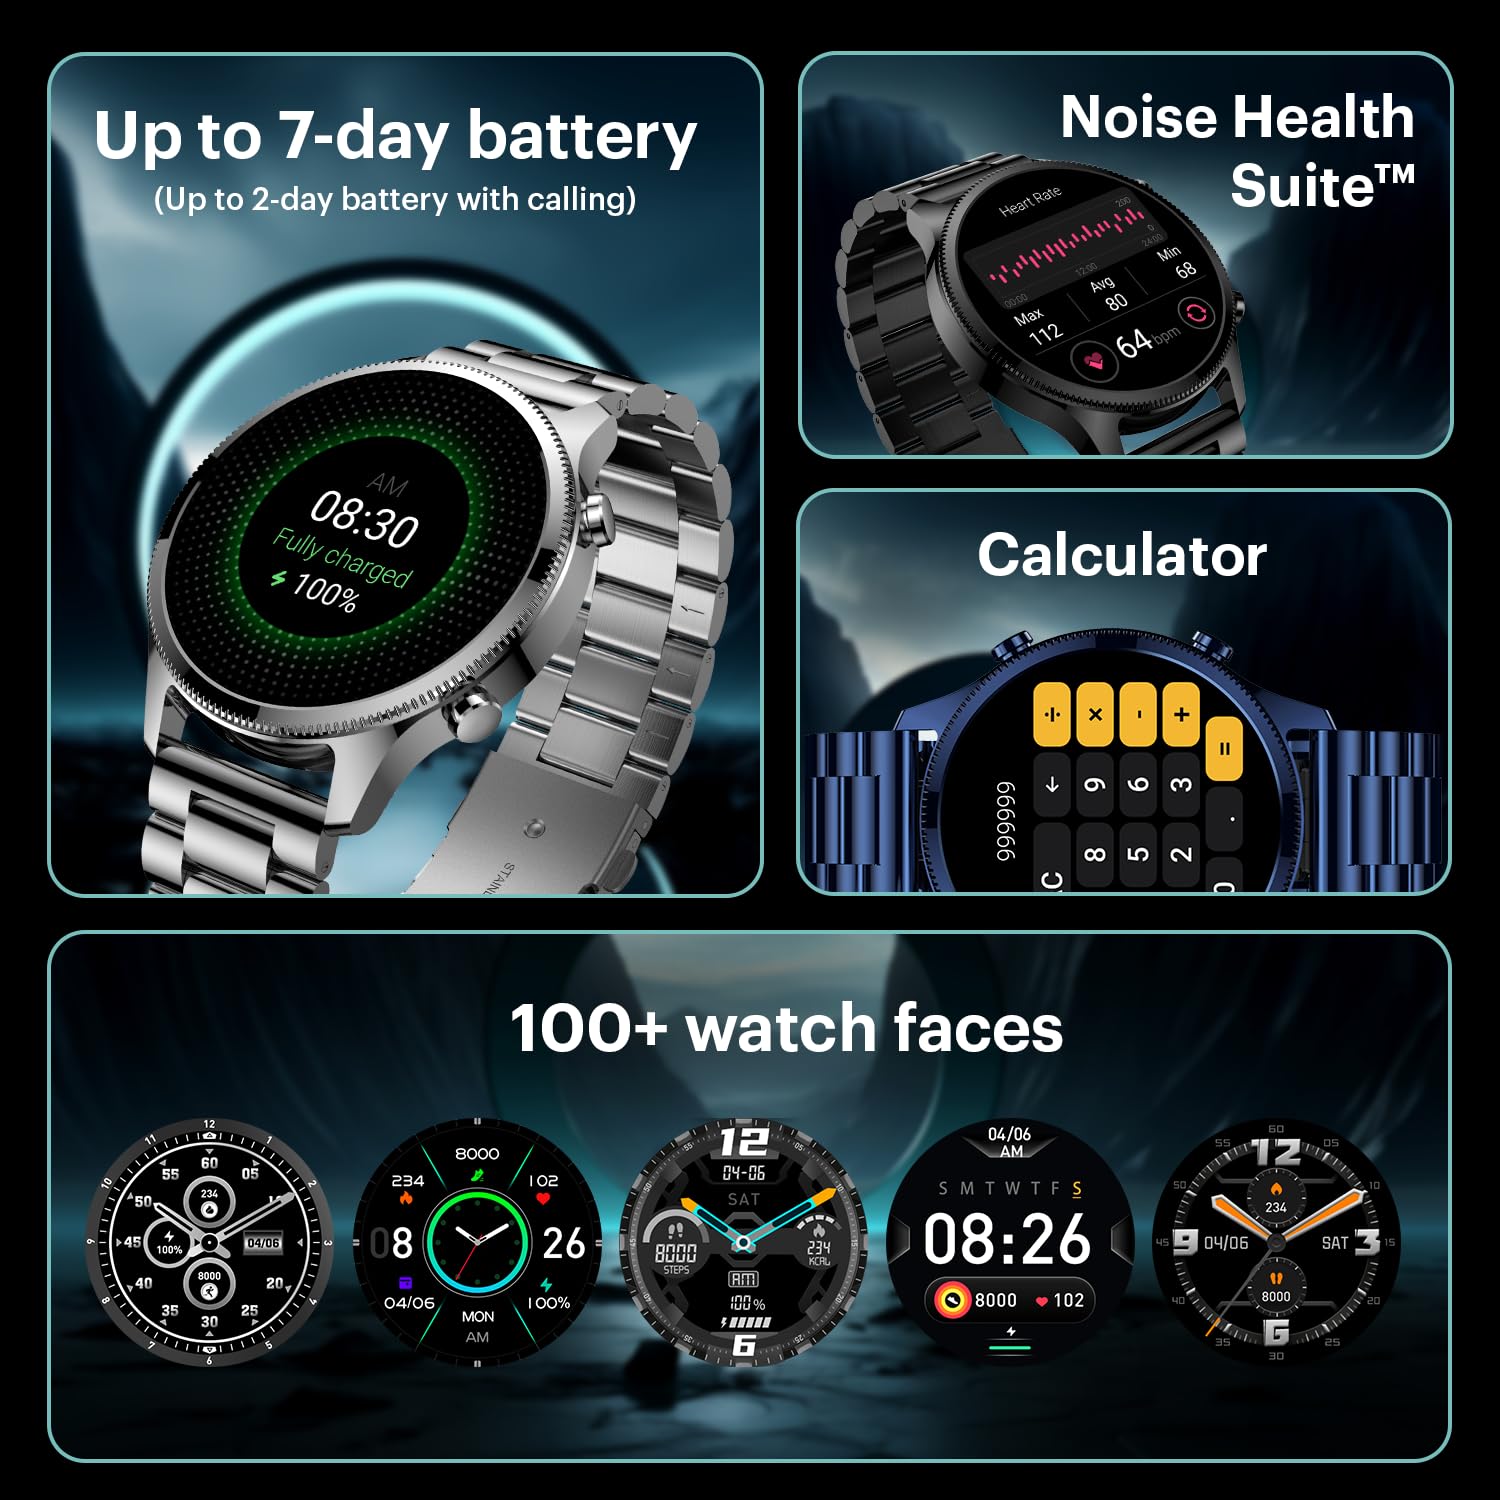 Noise Halo Plus Elite Edition Smartwatch with 1.46" Super AMOLED Display, Stainless Steel Finish Metallic Straps, 4-Stage Sleep Tracker, Smart Watch for Men and Women (Elite Silver) - Mahajan Electronics Online